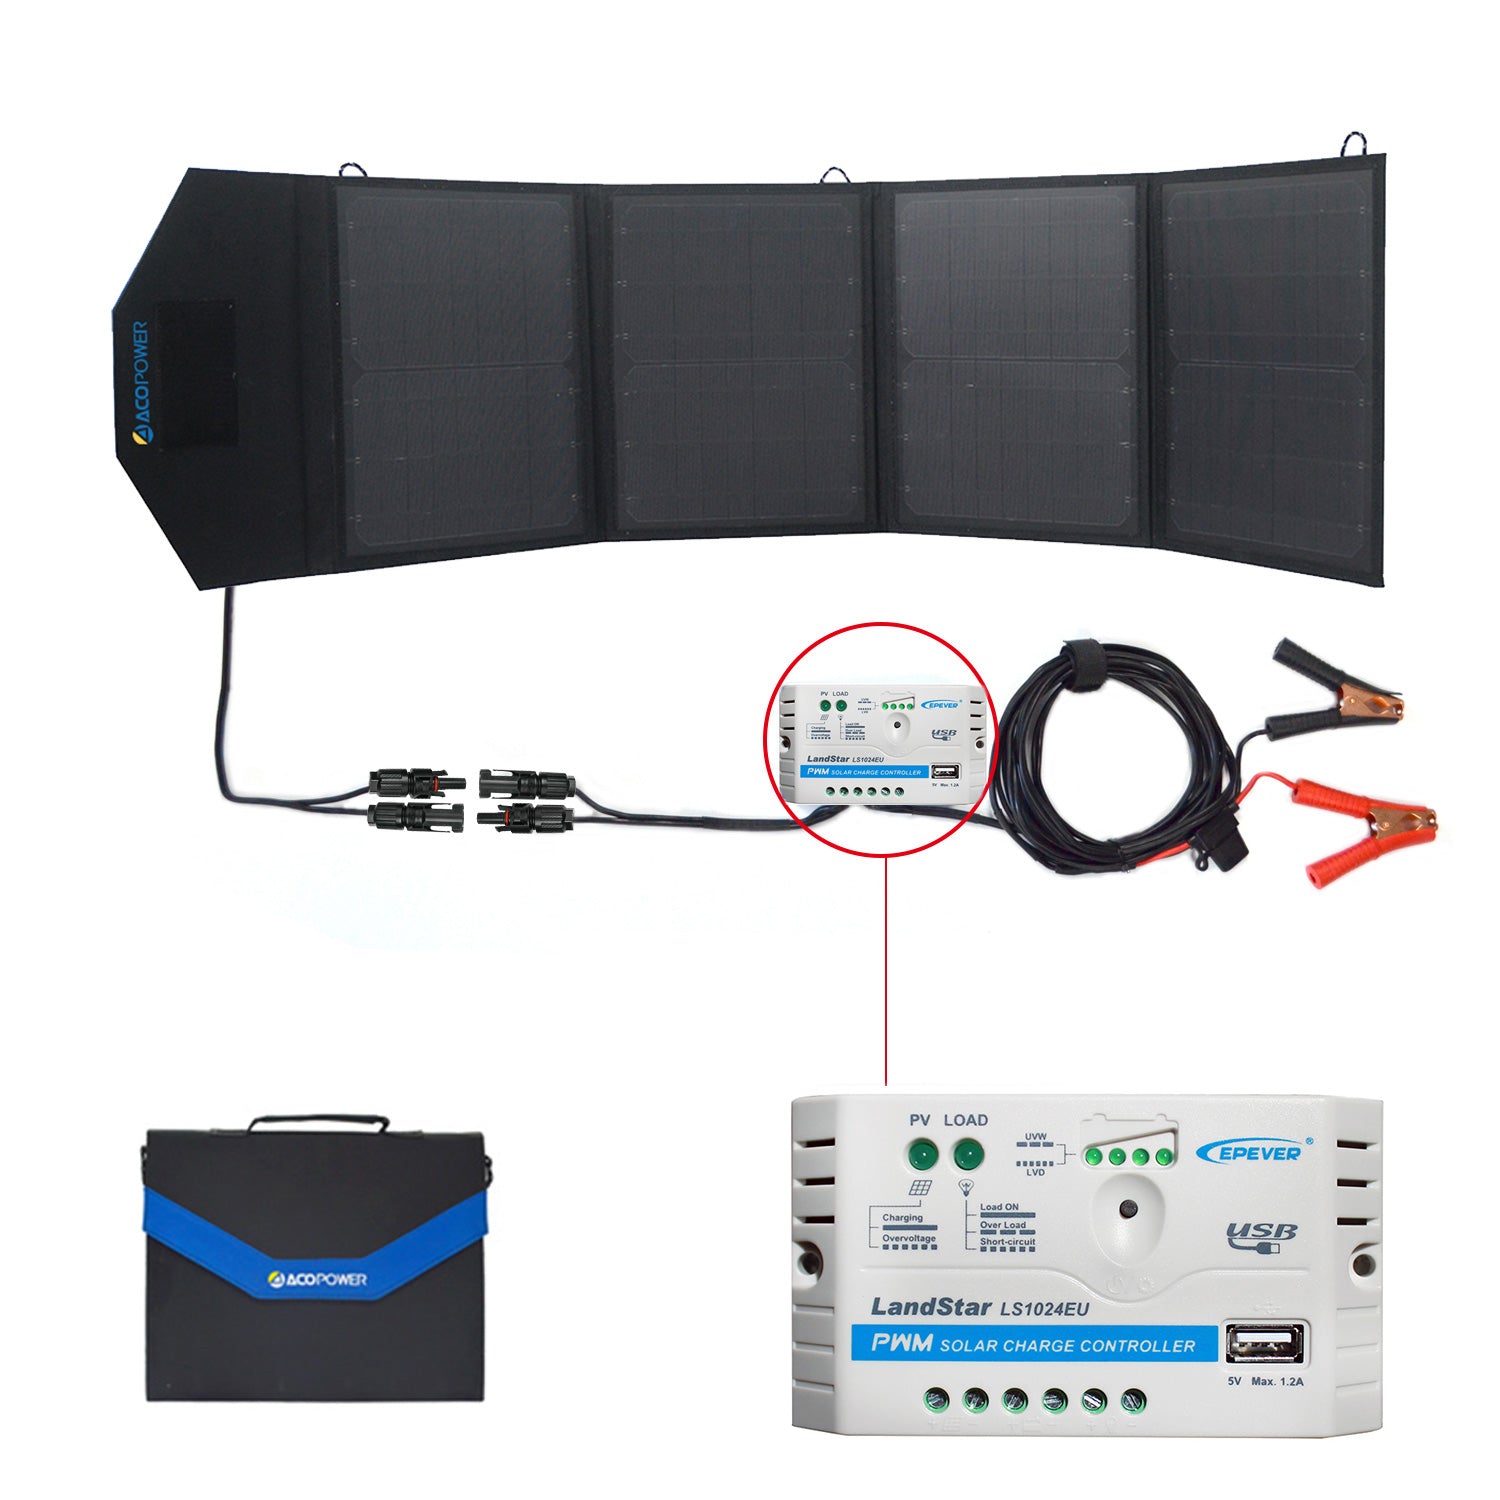 ACOPOWER 12V 50 Watt Portable Solar Suitcase with 5A Charge Controller - acopower